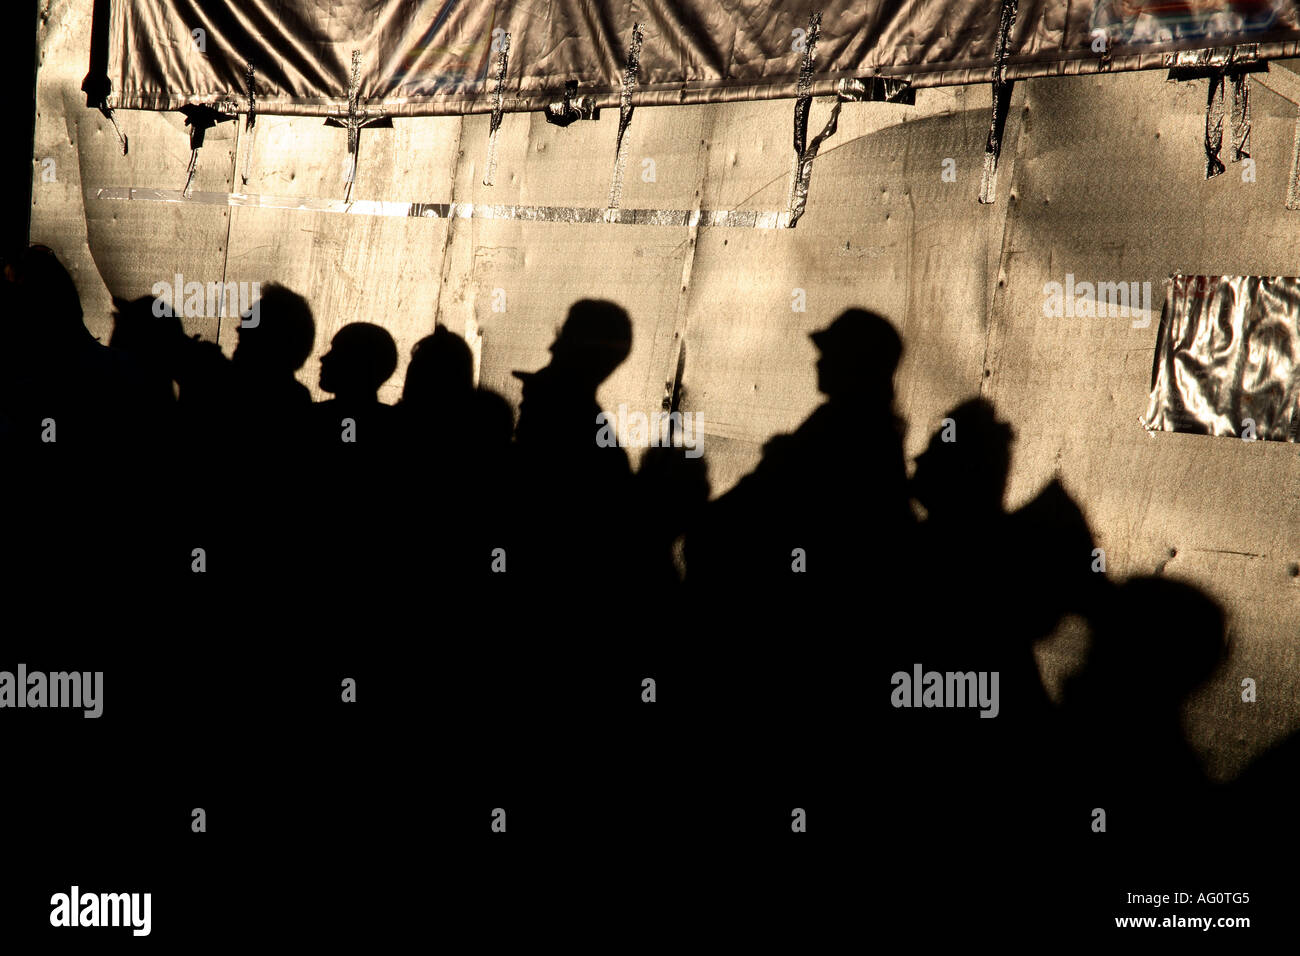 Shadows of audience on tarpaulin at Guilfest Music Festival. Guildford, Surrey, England Stock Photo